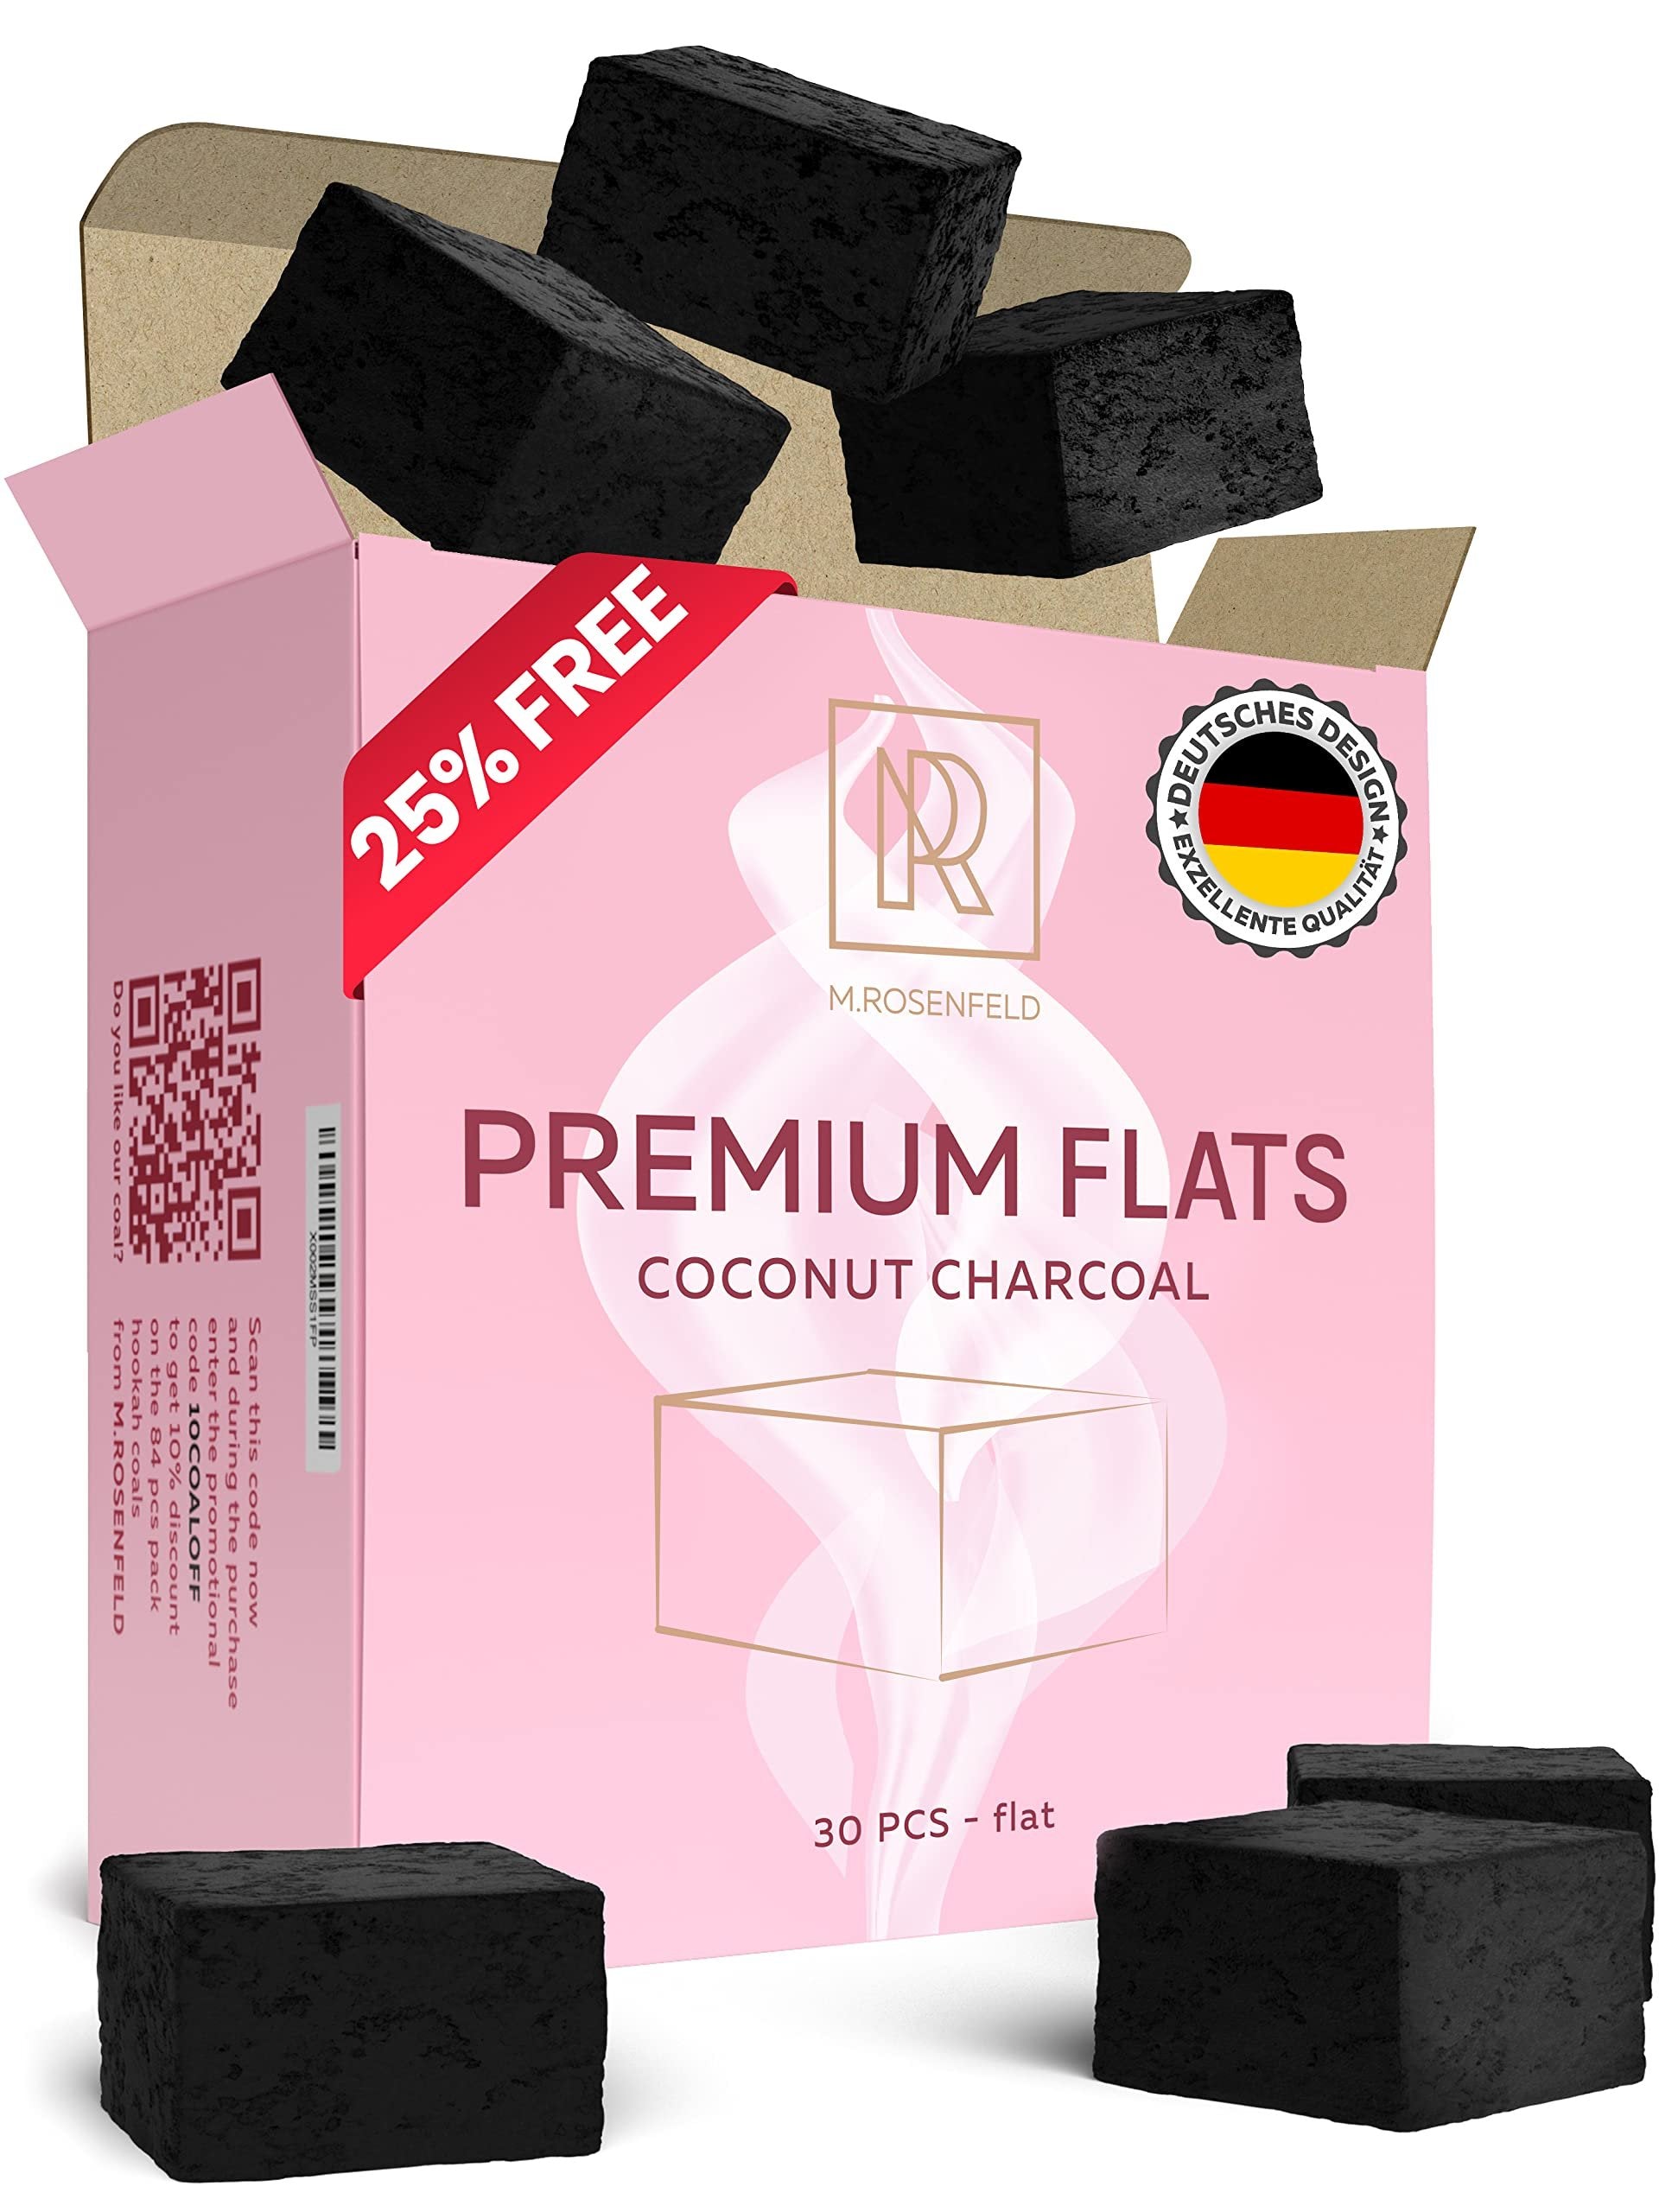 Pack of 2 Coconut Charcoal Cubes - Coconut Coals 2 XL Packs of 84 Count & 1.2 KG (2.6 lbs) - Premium Quality 25mm (1x1x1 in) - 100% Natural Coconut Charcoal Cubes - NOT Quick Light - Pack of 2